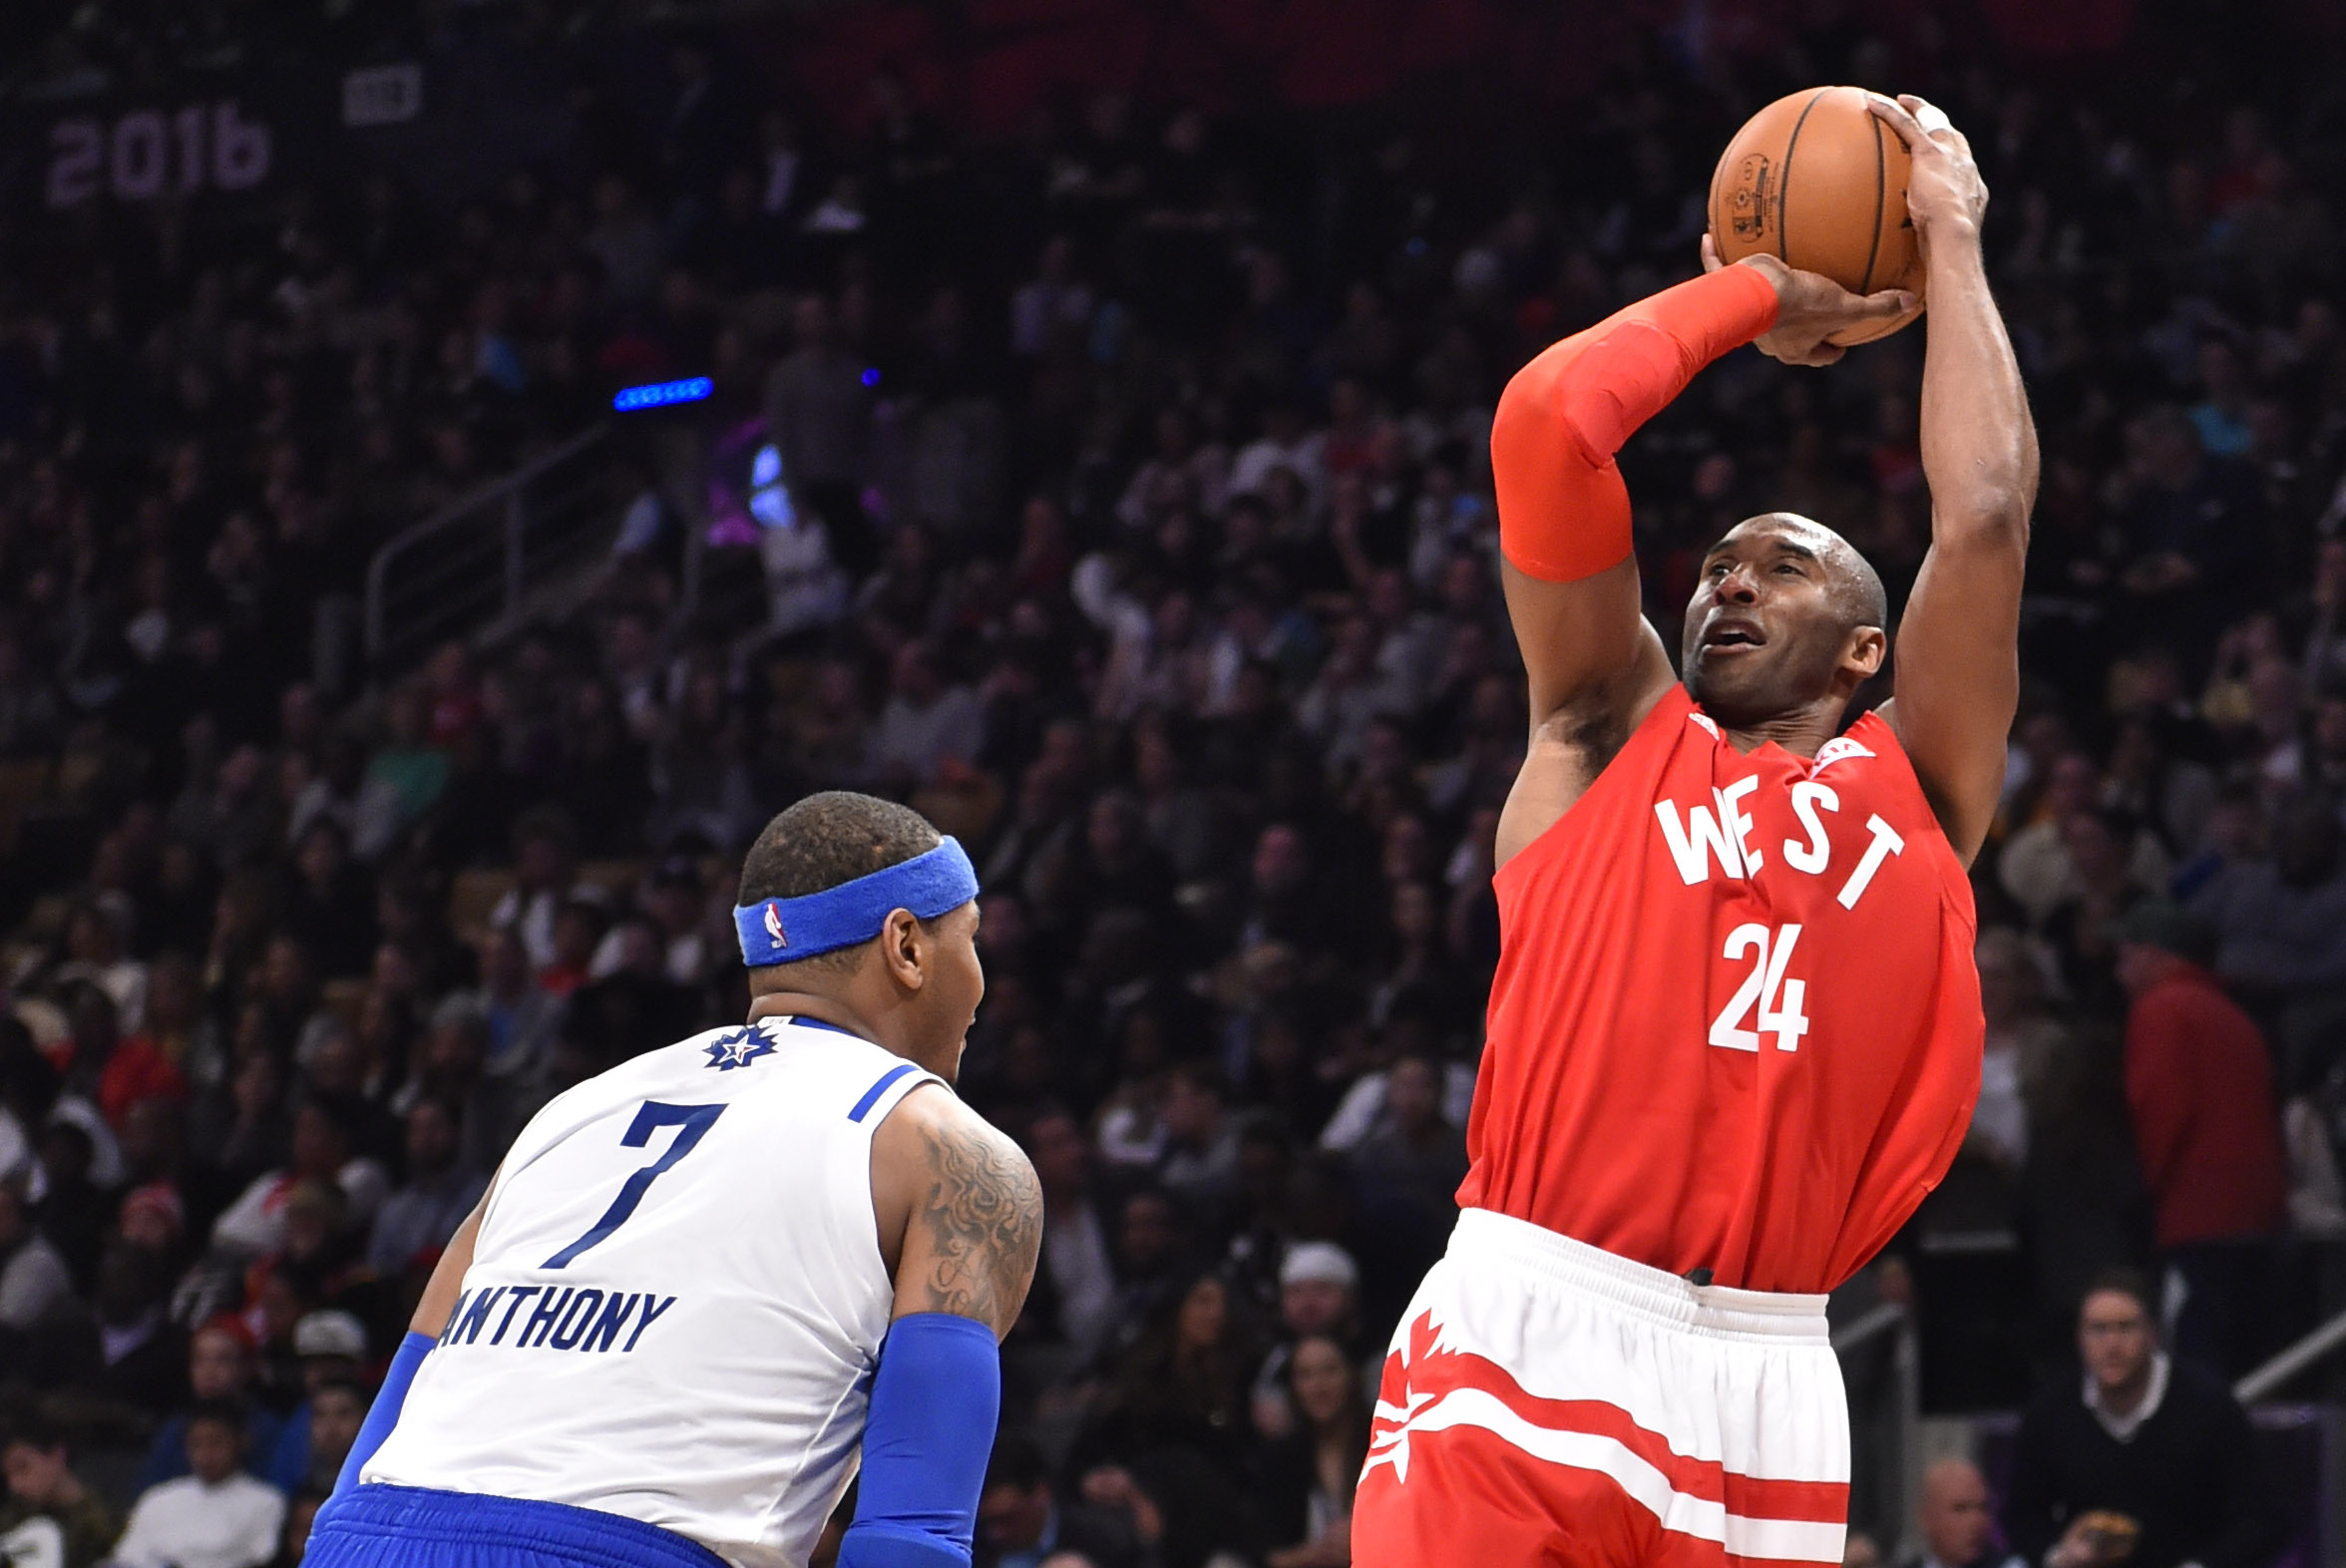 Toronto Takes It Back To First-Ever NBA Game For 2016 All-Star